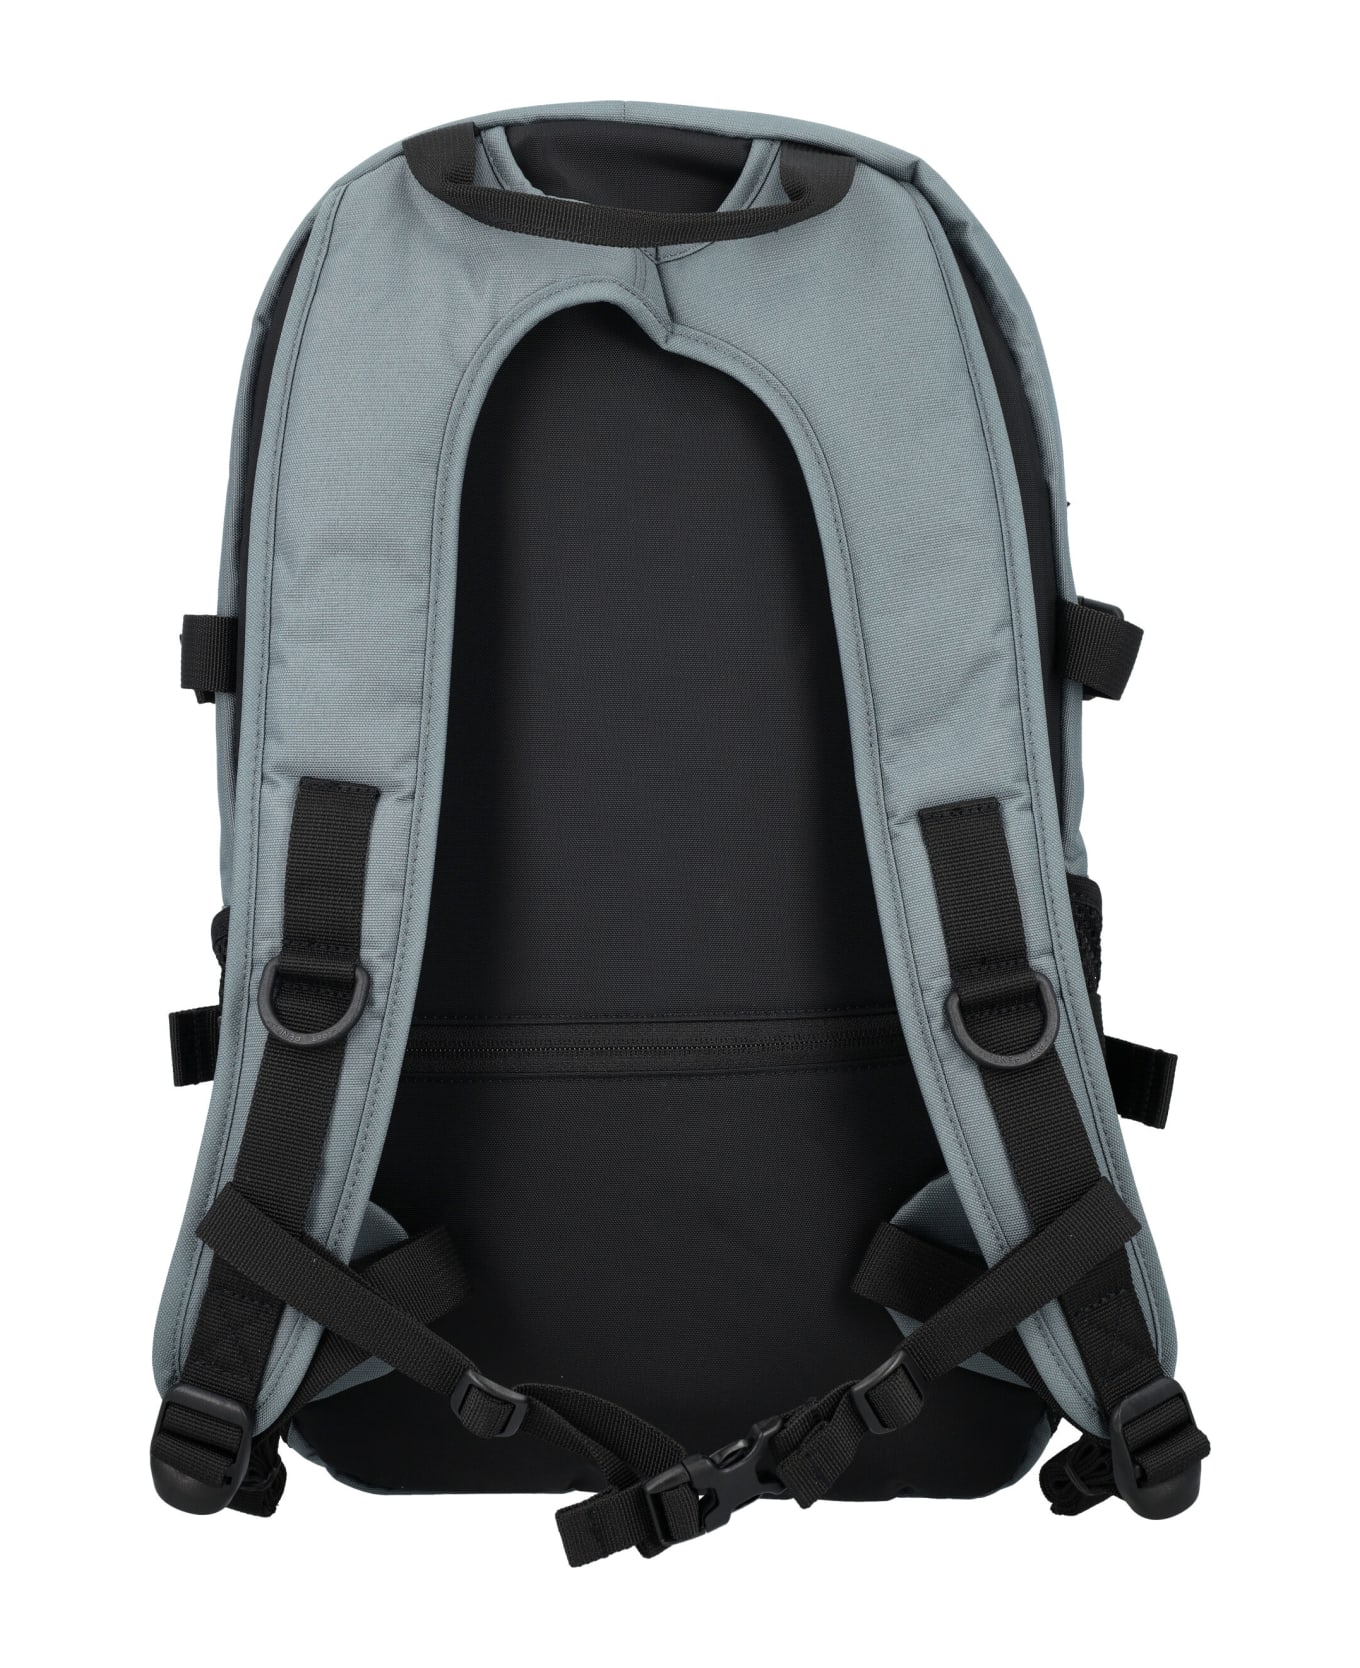 Eastpak Floid Backpack - STORMY バックパック